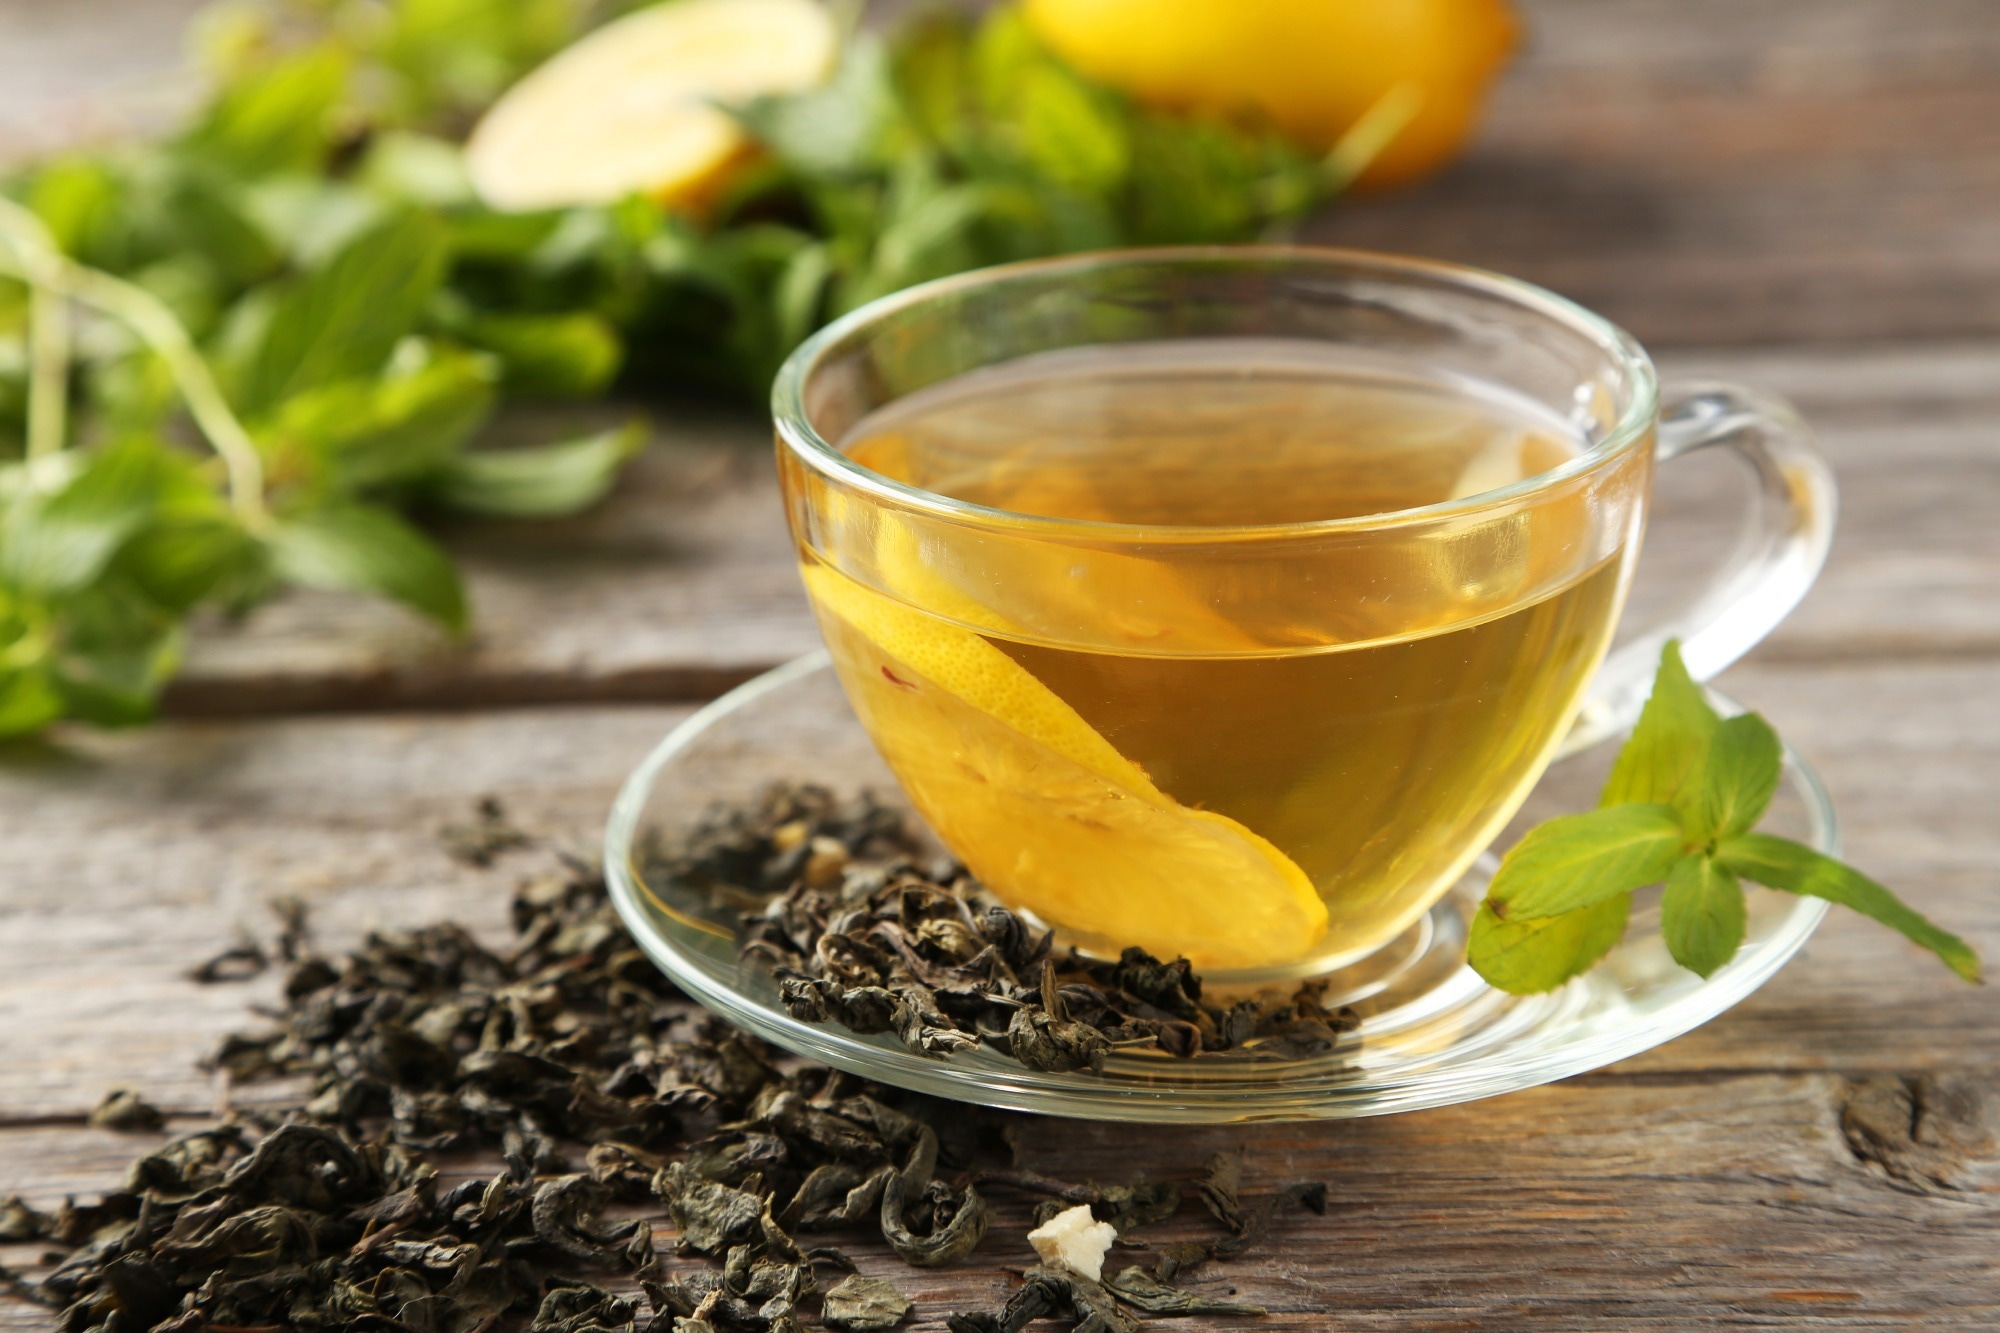 Study: Effects of green tea polyphenols on inflammation and iron status. Image Credit: 5 second Studio/Shutterstock.com